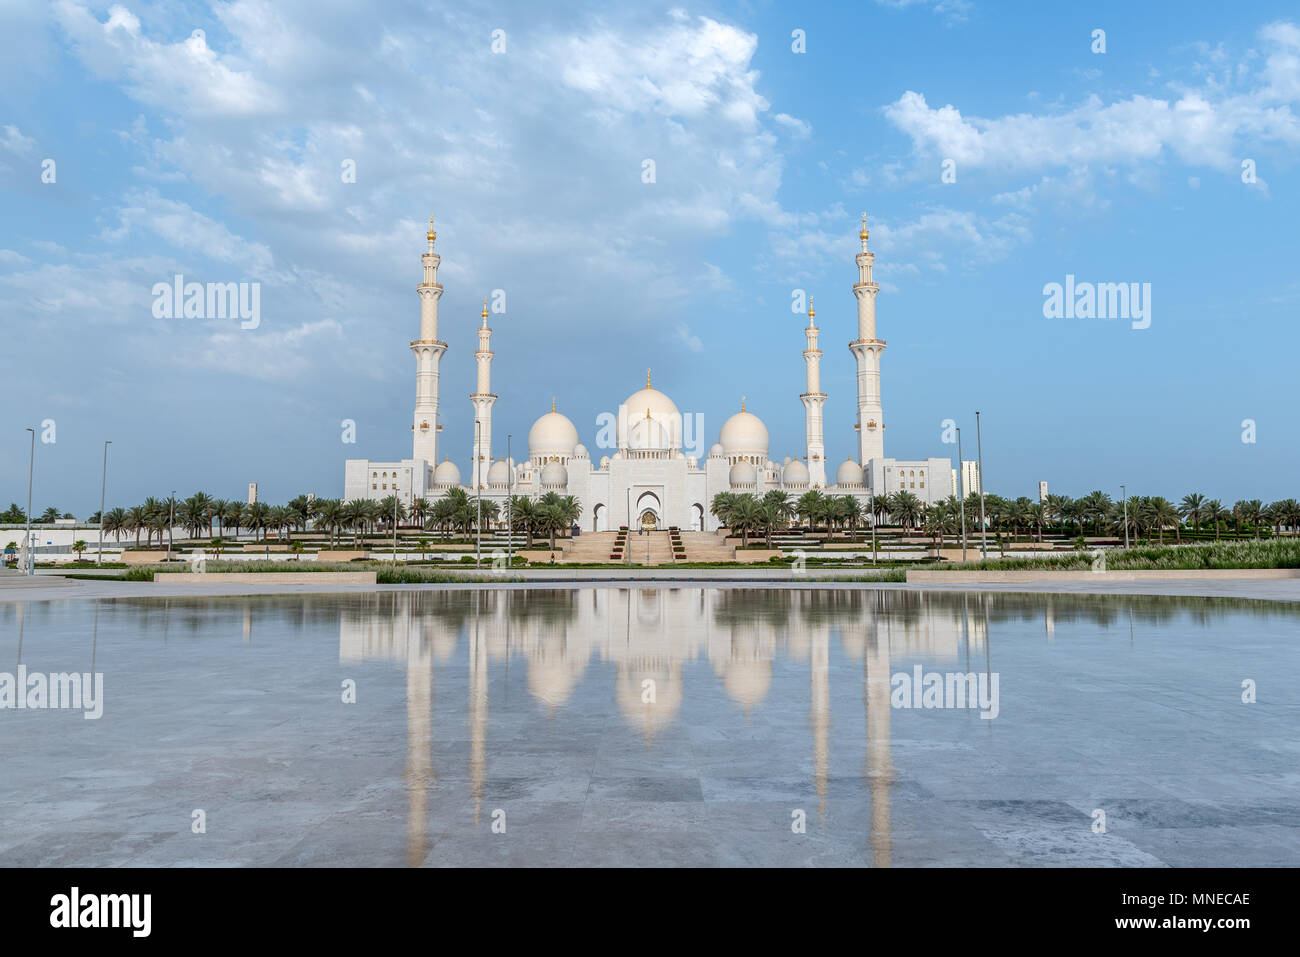 Abu Dhabi, United Arab Emirates. 17, May, 2018.  Sunrise at Sheikh Zayed Grand Mosque in Abu Dhabi, capital city of the United Arab Emirates, on the first day of Ramadan 2018  Mosque is made of white Italian marble and is also home to the final resting place of the Founding Father of the UAE, Zayed bin Sultan Al Nahyan  ©2018 Richard Sharrocks  / Alamy Live News Stock Photo